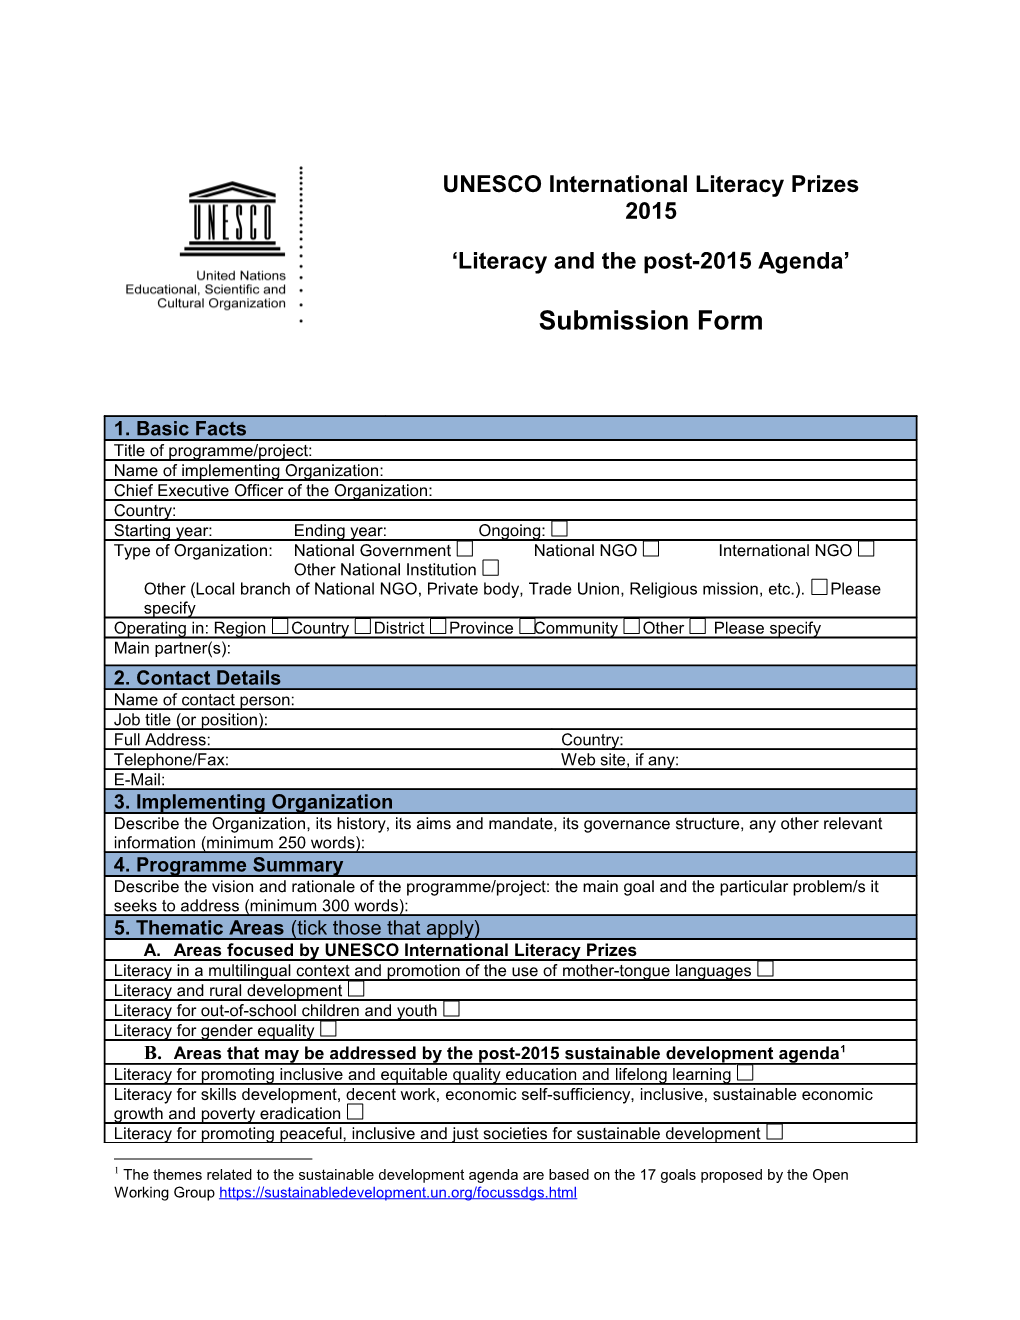 Date of Submission Form Completion (MM/DD/YYYY)